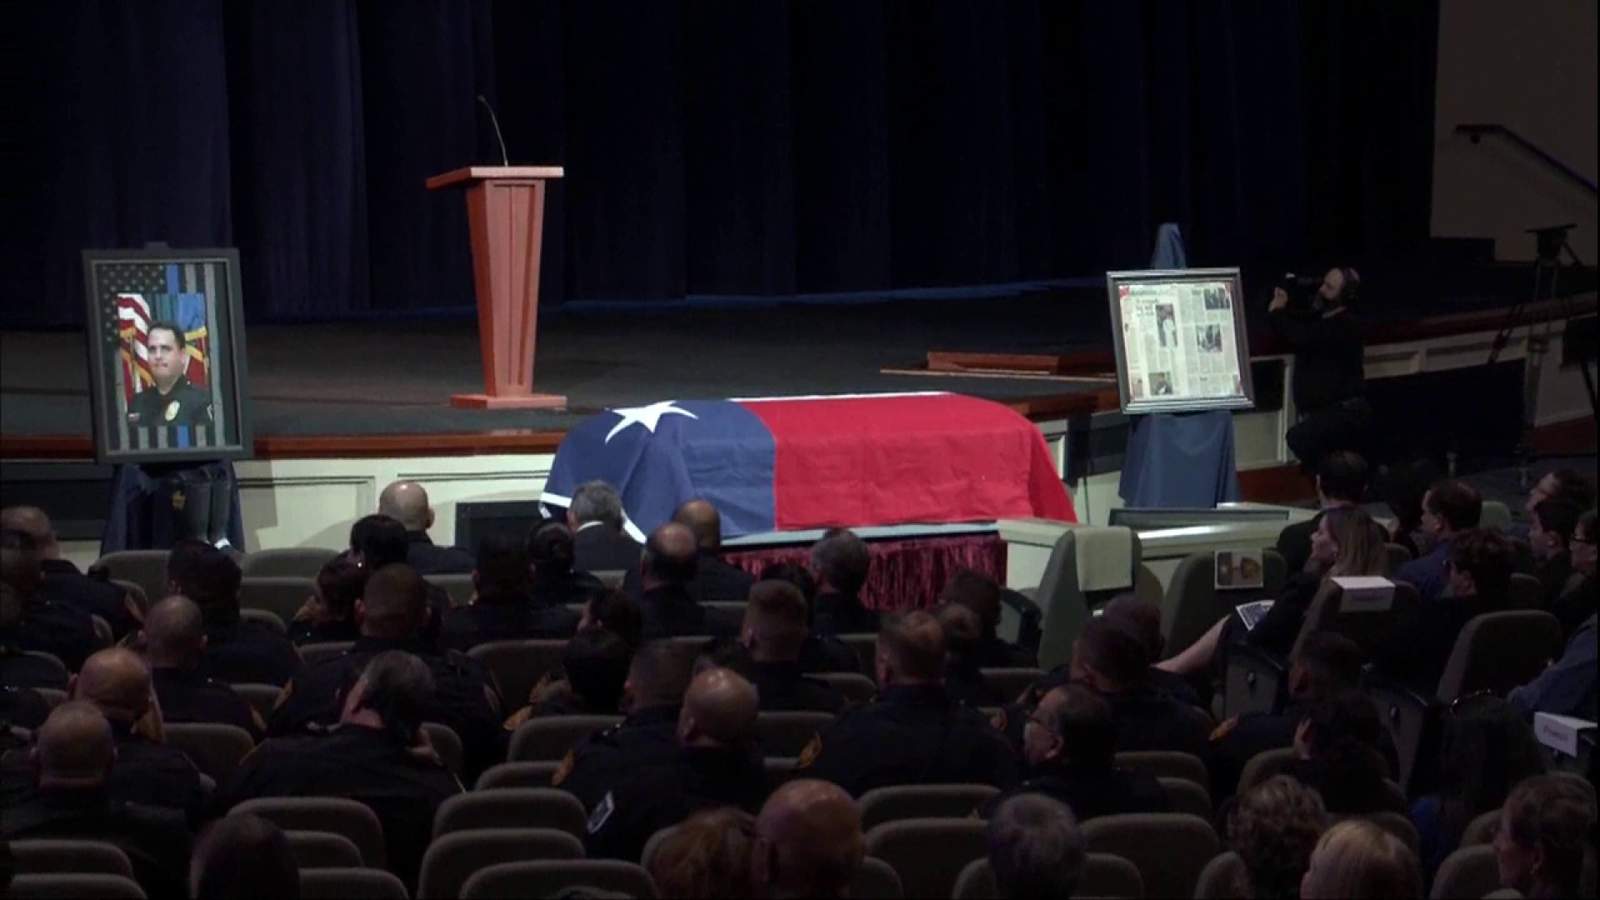 Funeral services for SAISD officer Cliff Martinez